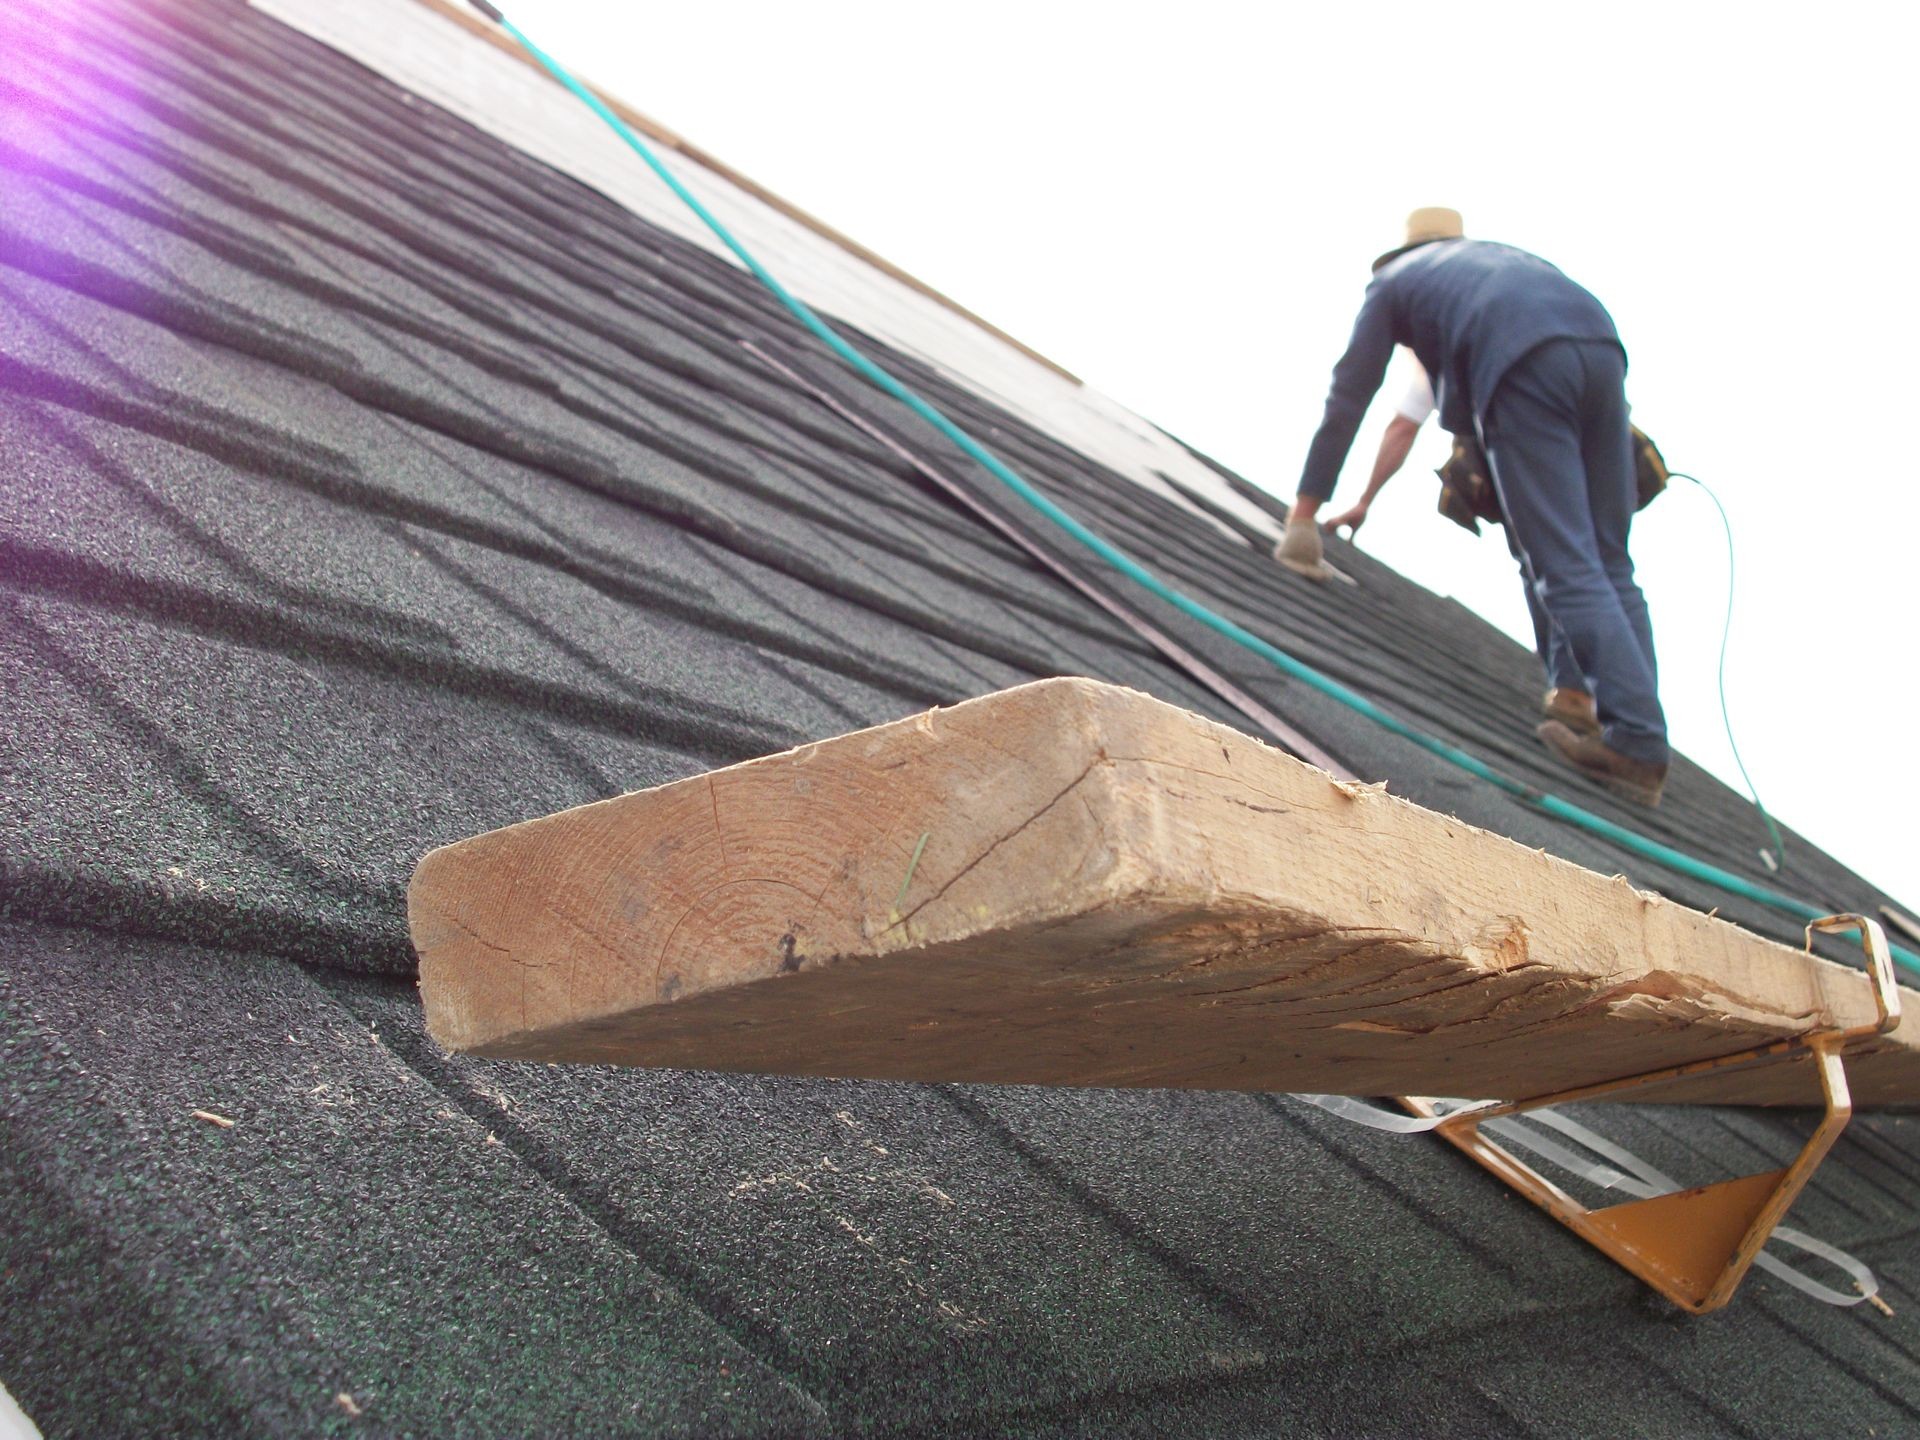 Installing a roof